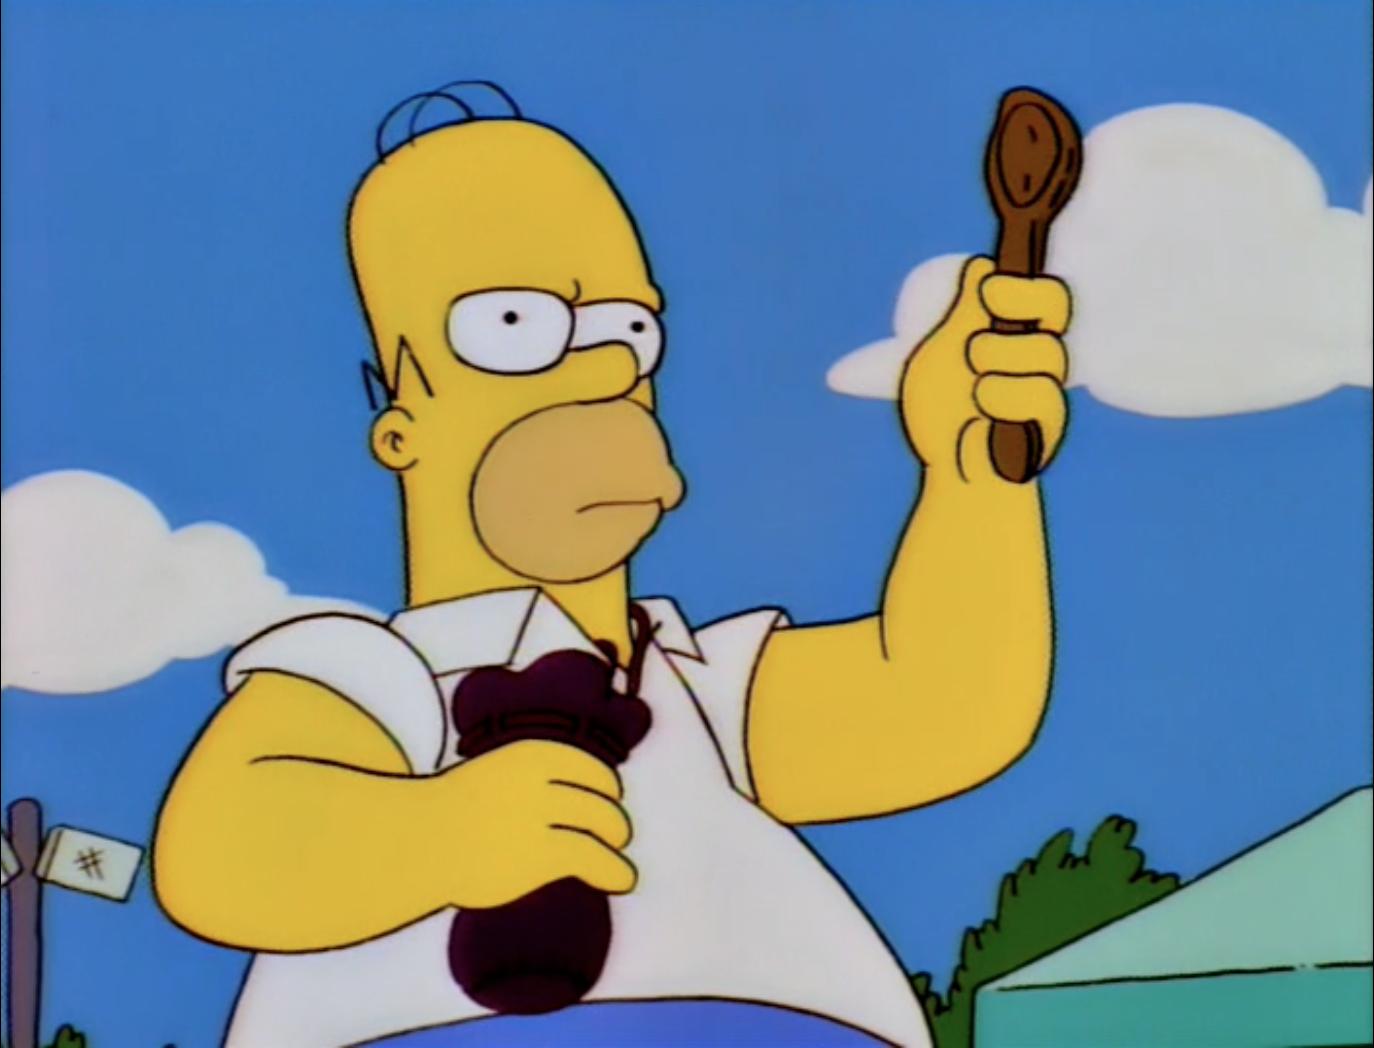 They say he carved it himself... from a bigger spoon.